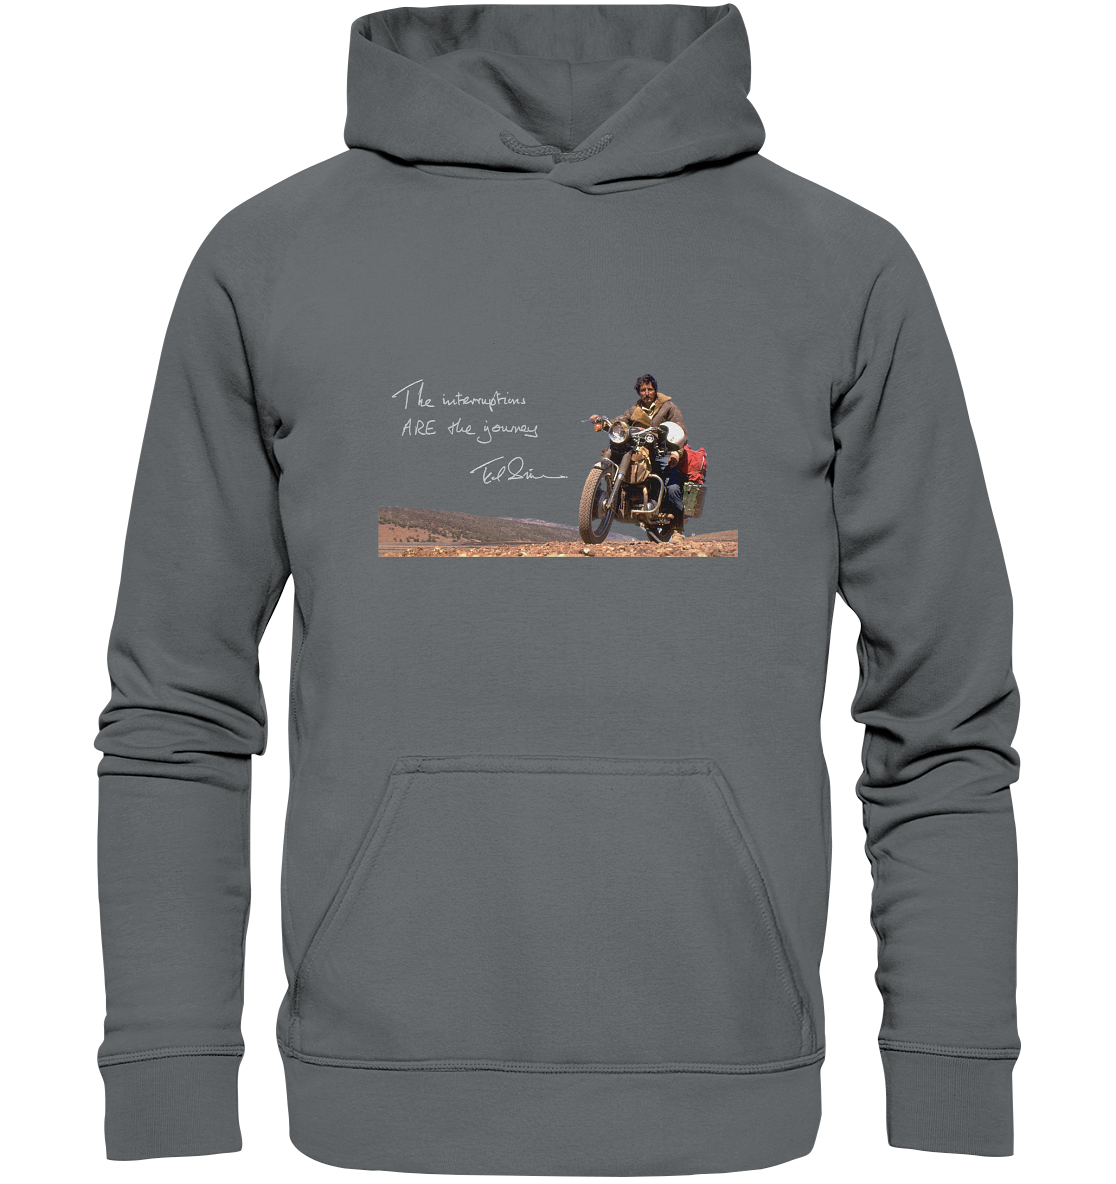 Hoodie "Ted Simon - The Interruptions are the journey." grau